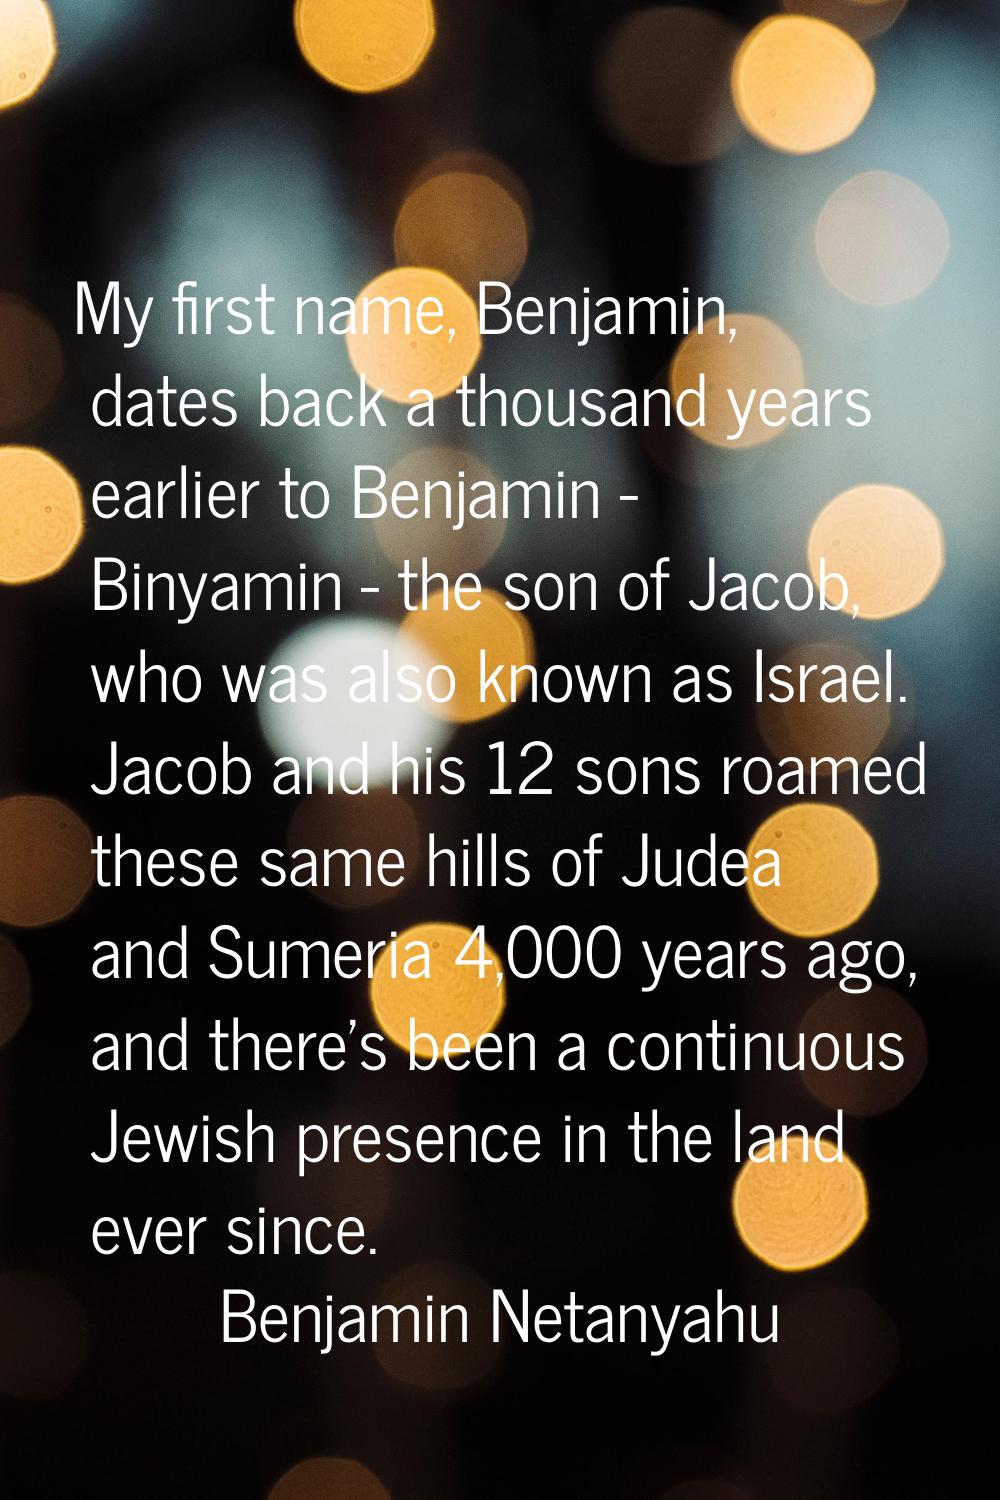 My first name, Benjamin, dates back a thousand years earlier to Benjamin - Binyamin - the son of Ja